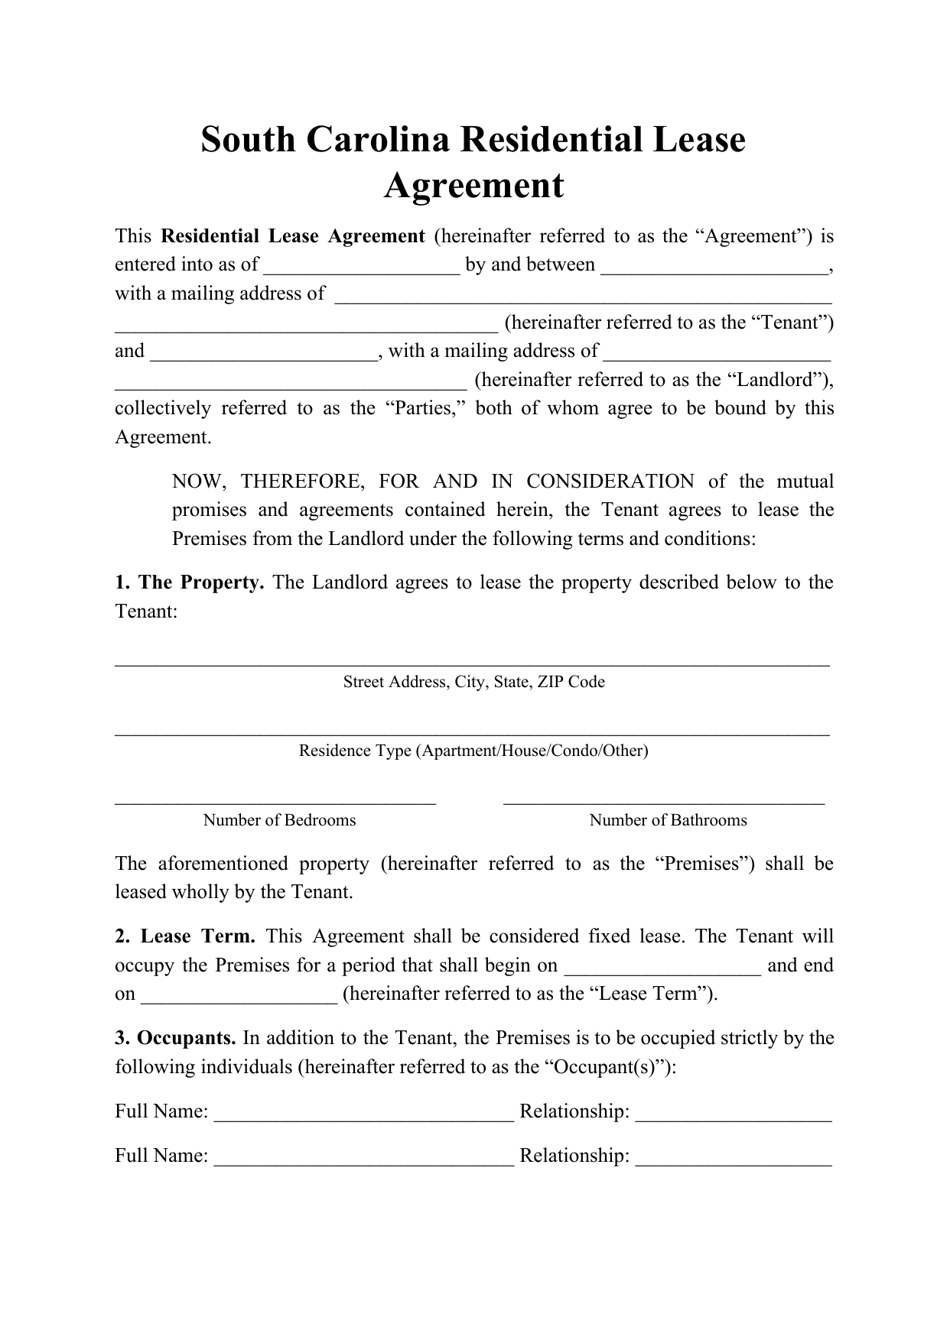 south-carolina-residential-lease-agreement-template-fill-out-sign-online-and-download-pdf